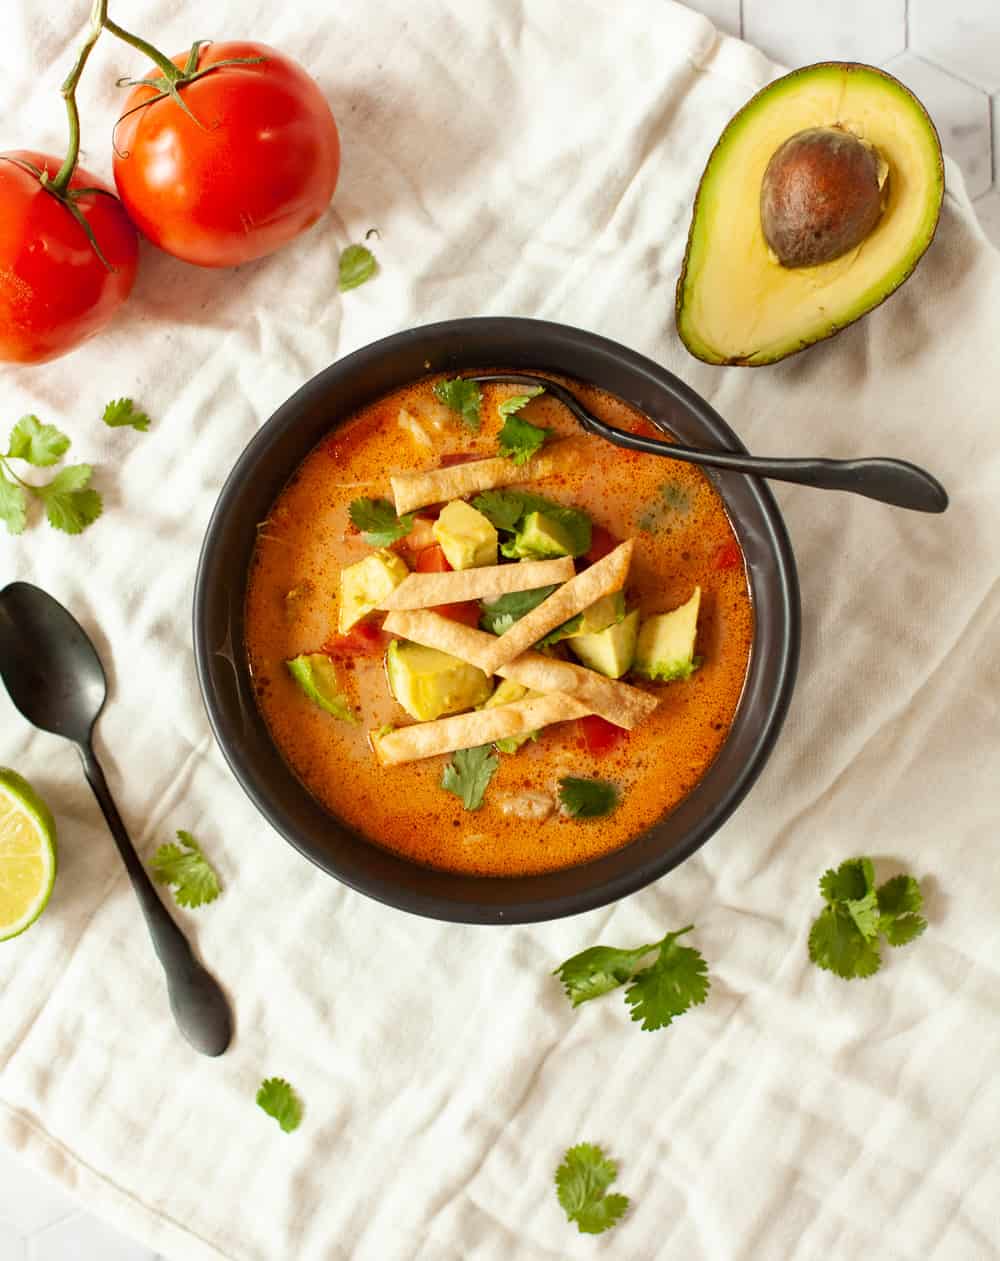 Chicken Tortilla Soup in a dark bowl with a black spoon. The bowl is on a white table cloth and surrounded by tomatoes, fresh herbs and avocado.